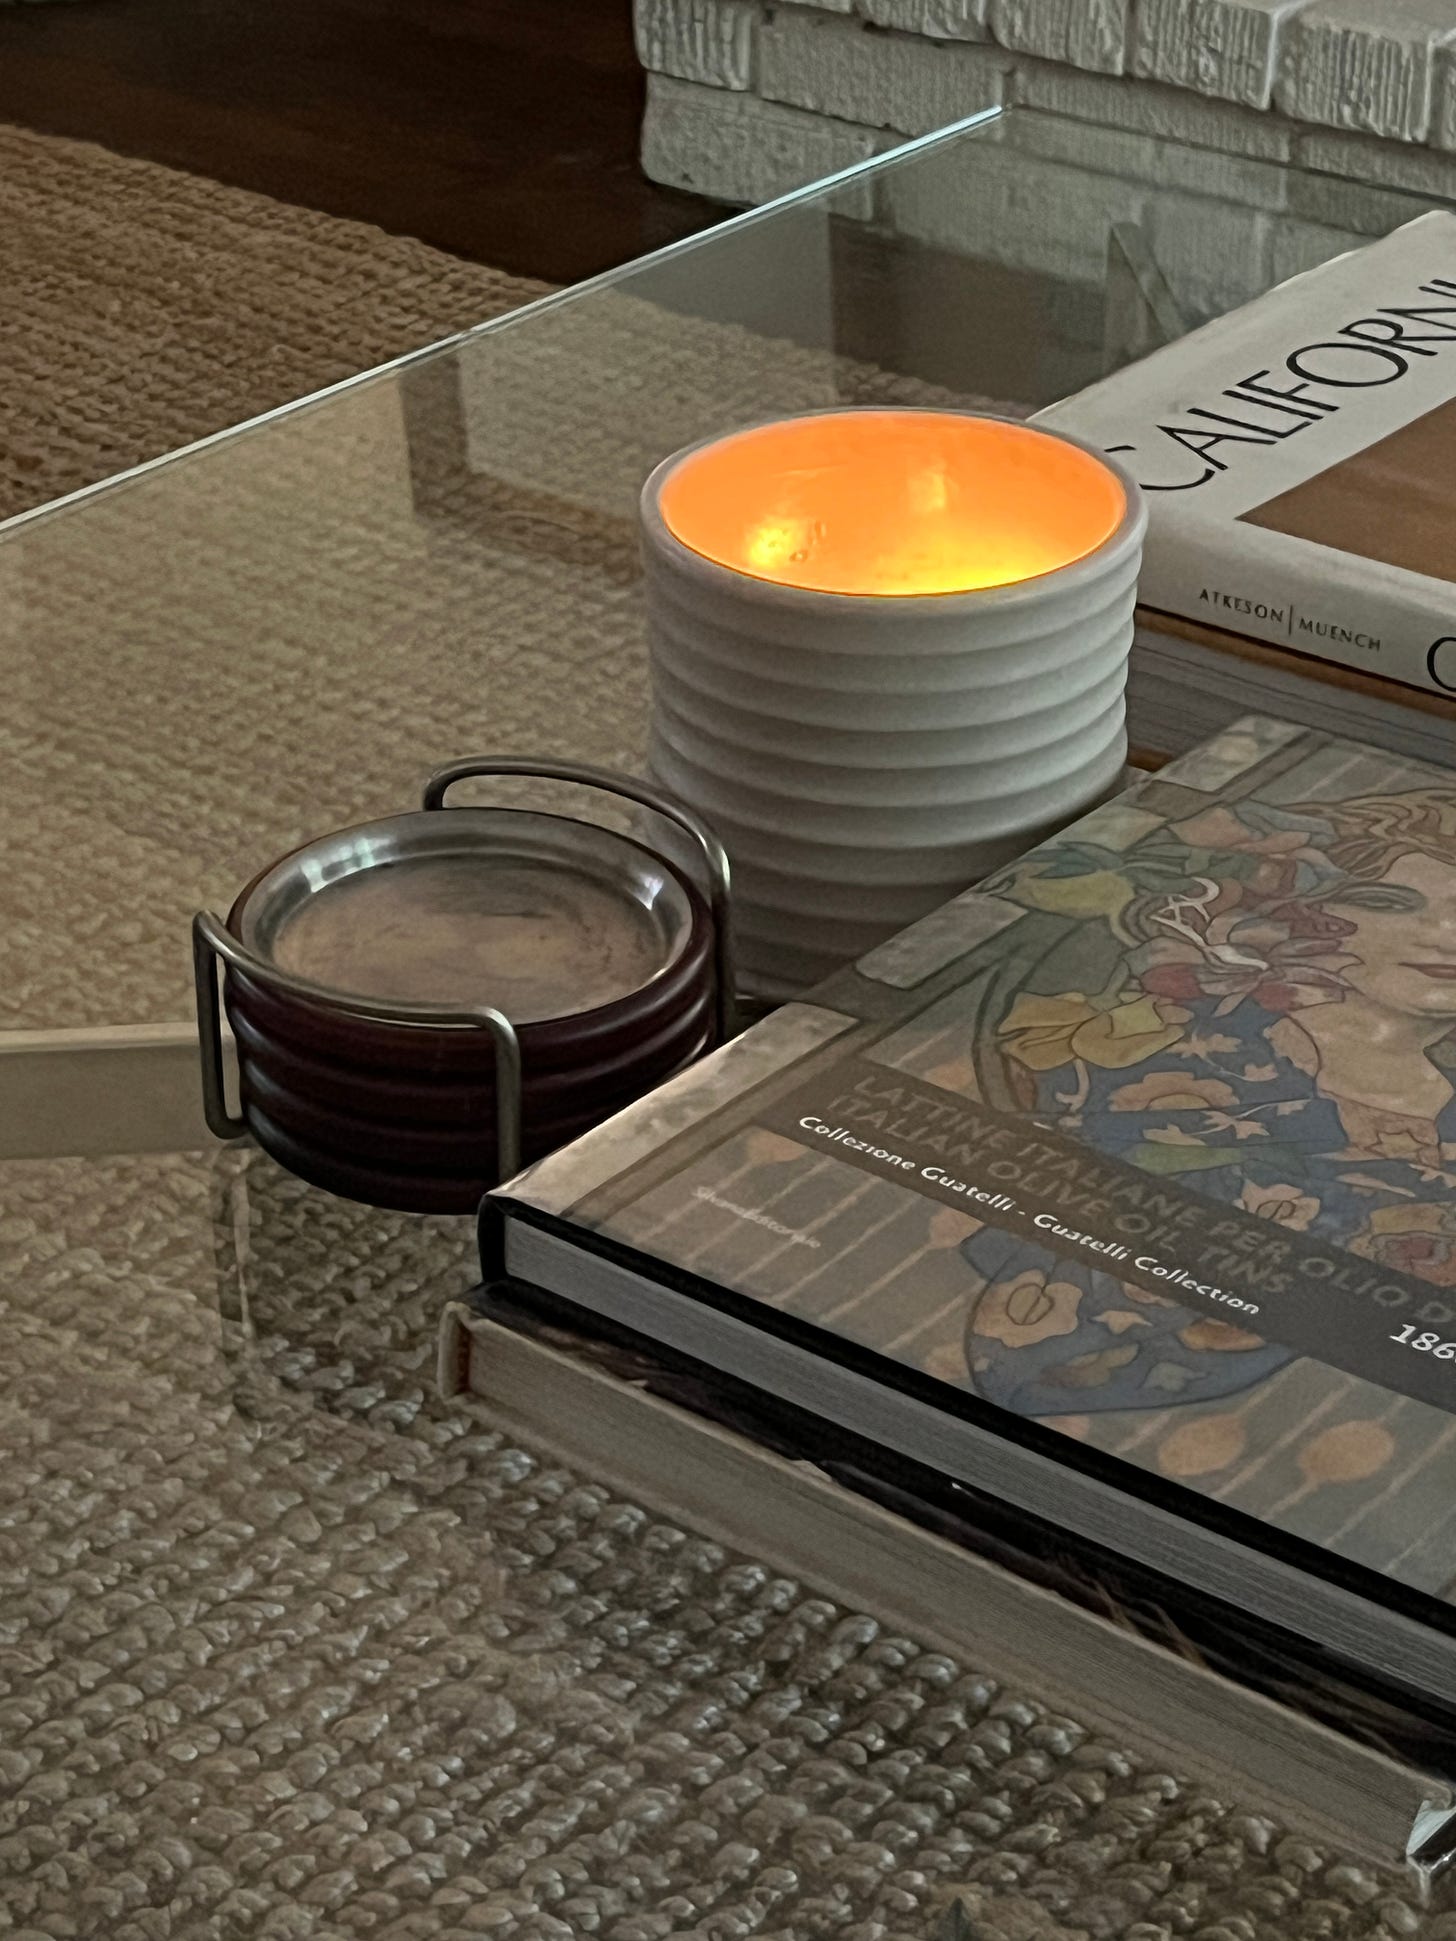 A lit candle sitting atop a coffee table nestled between coasters and books.